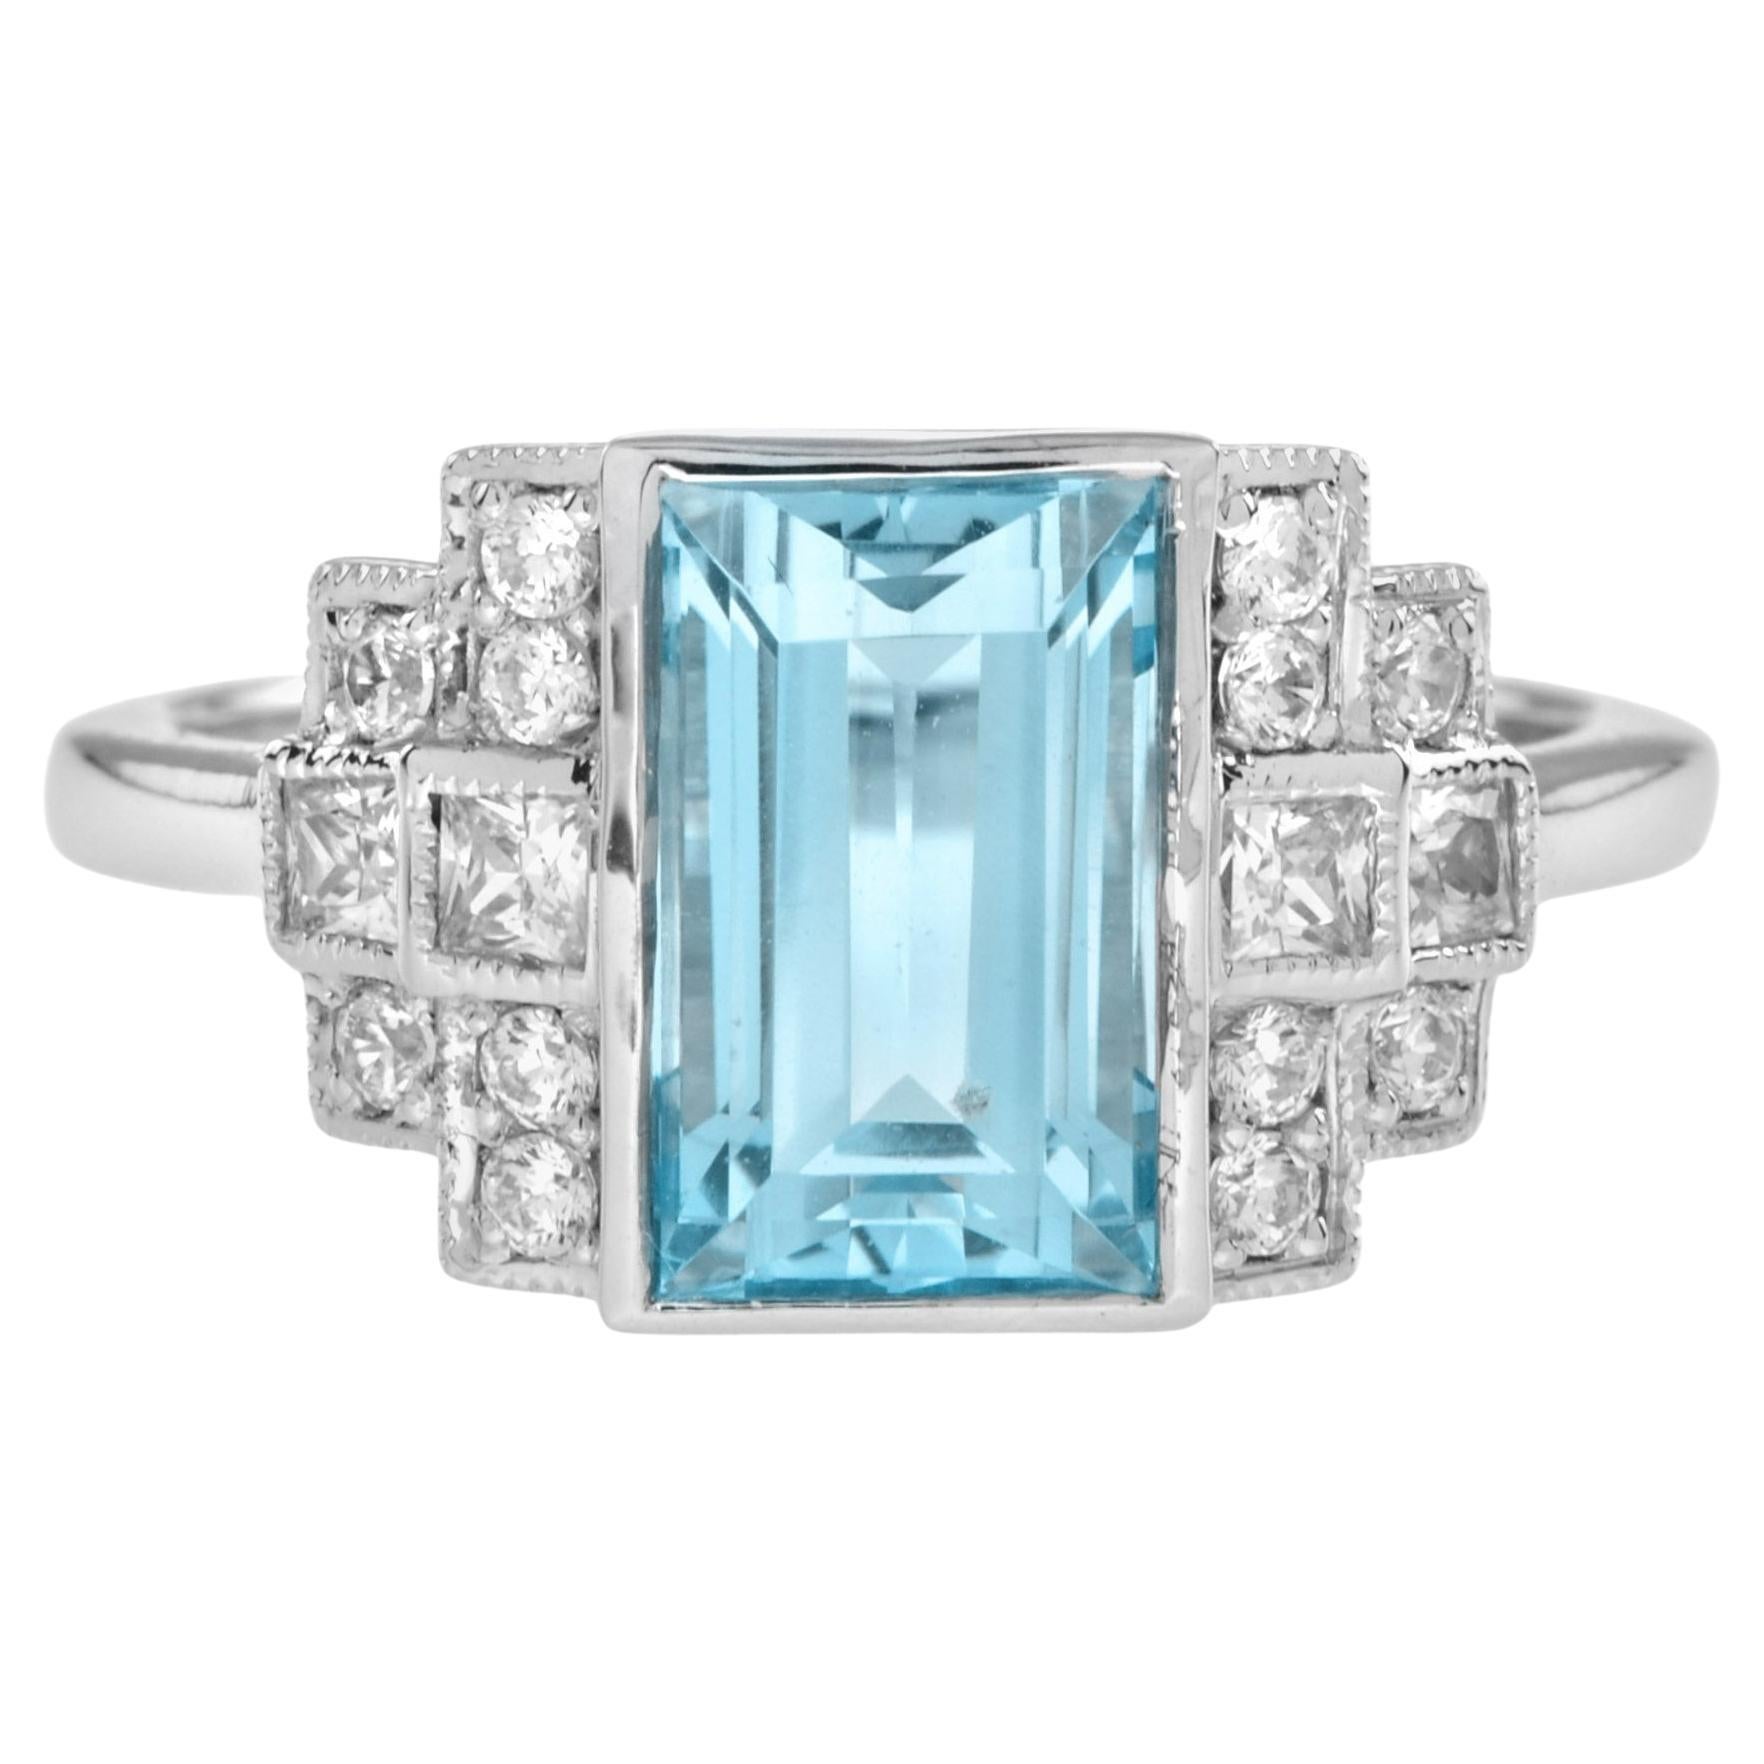 3.50 Ct. Aquamarine and Diamond Art Deco Style Cocktail Ring in 18K White Gold